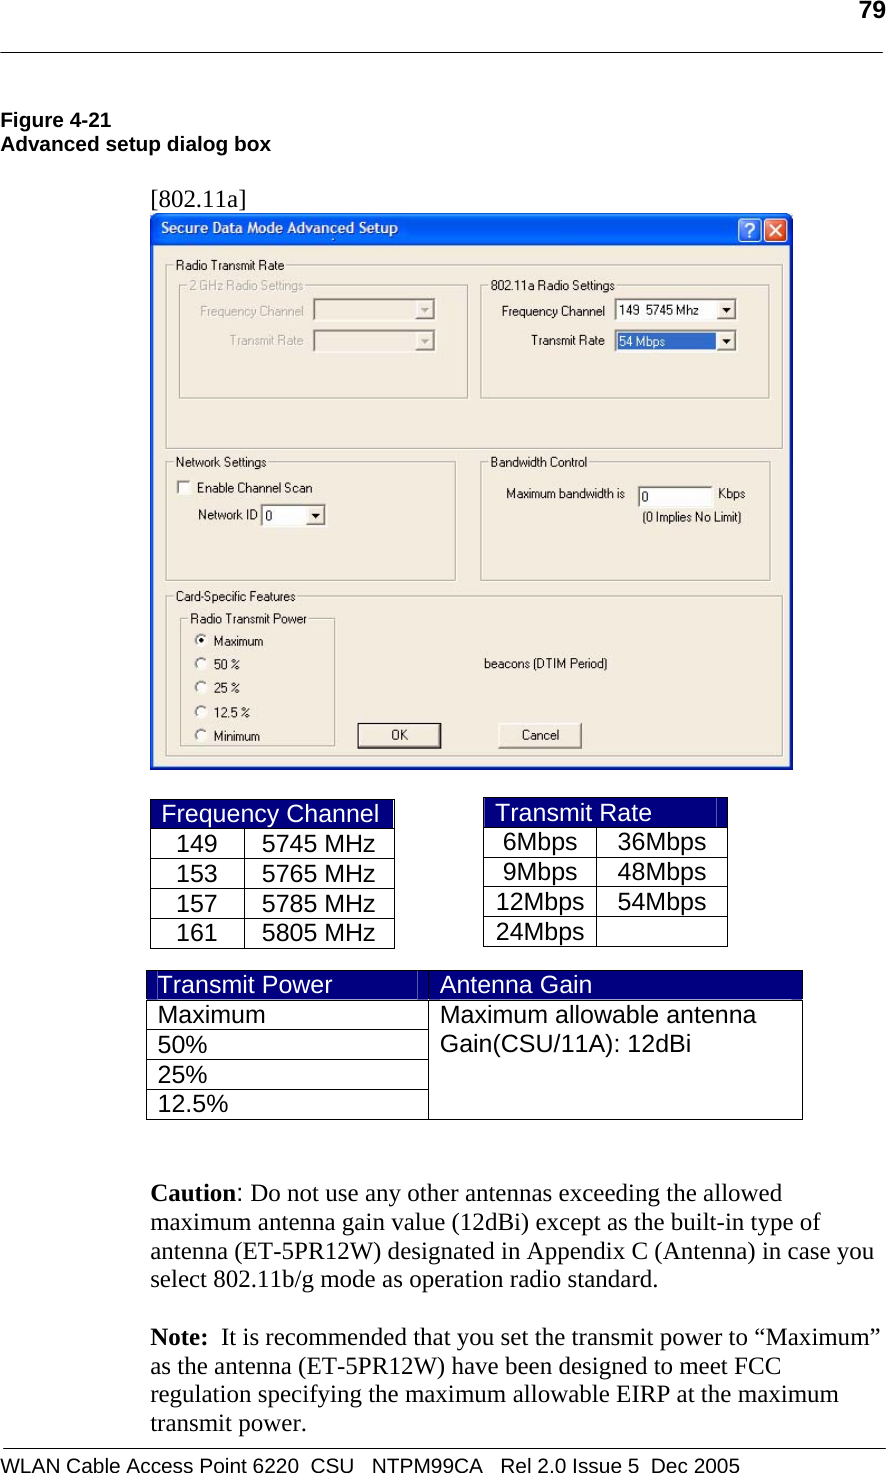   79  WLAN Cable Access Point 6220  CSU   NTPM99CA   Rel 2.0 Issue 5  Dec 2005 Figure 4-21 Advanced setup dialog box  [802.11a]   Frequency Channel149 5745 MHz153 5765 MHz157 5785 MHz161 5805 MHz        Caution: Do not use any other antennas exceeding the allowed maximum antenna gain value (12dBi) except as the built-in type of antenna (ET-5PR12W) designated in Appendix C (Antenna) in case you select 802.11b/g mode as operation radio standard.  Note:  It is recommended that you set the transmit power to “Maximum” as the antenna (ET-5PR12W) have been designed to meet FCC regulation specifying the maximum allowable EIRP at the maximum transmit power.  Transmit Rate 6Mbps 36Mbps 9Mbps 48Mbps 12Mbps 54Mbps 24Mbps  Transmit Power  Antenna Gain Maximum 50% 25% 12.5% Maximum allowable antenna  Gain(CSU/11A): 12dBi   